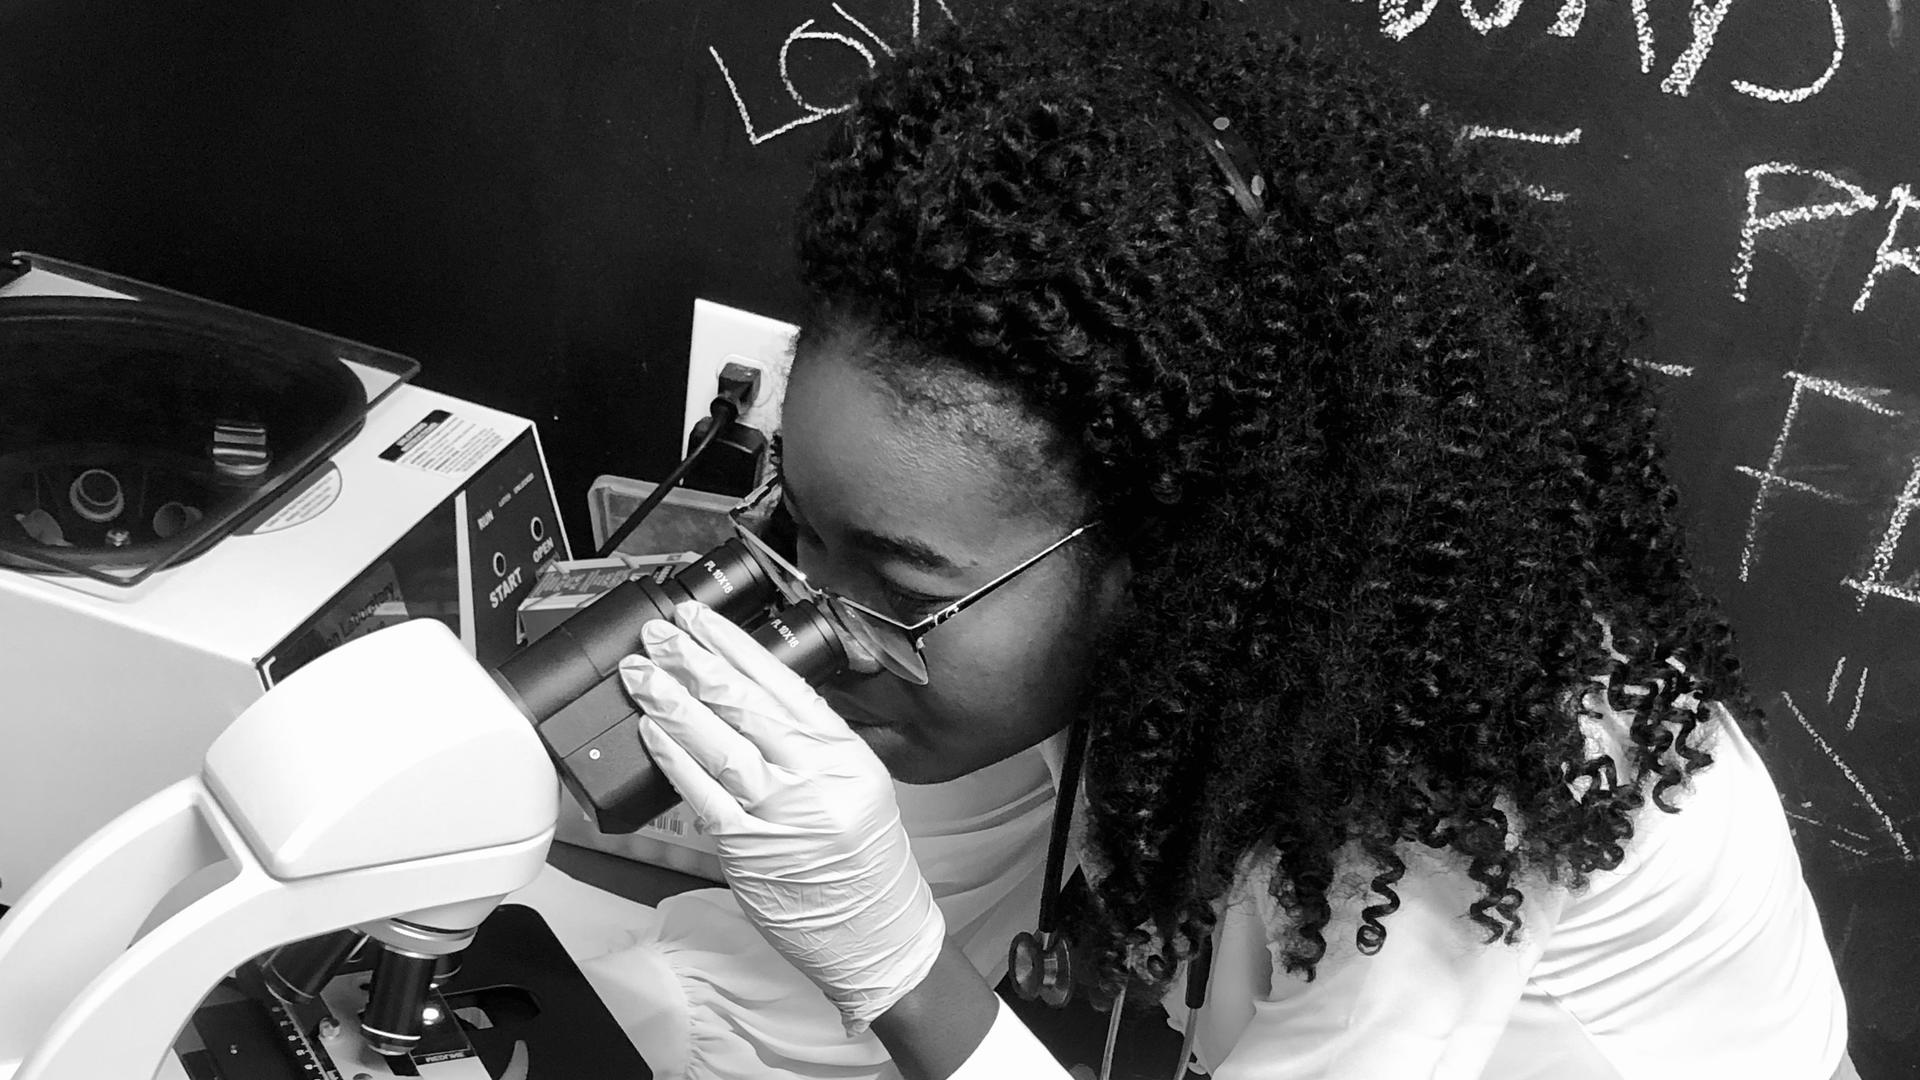 Torbertha Torbor, a nurse practitioner, looks into a microscope